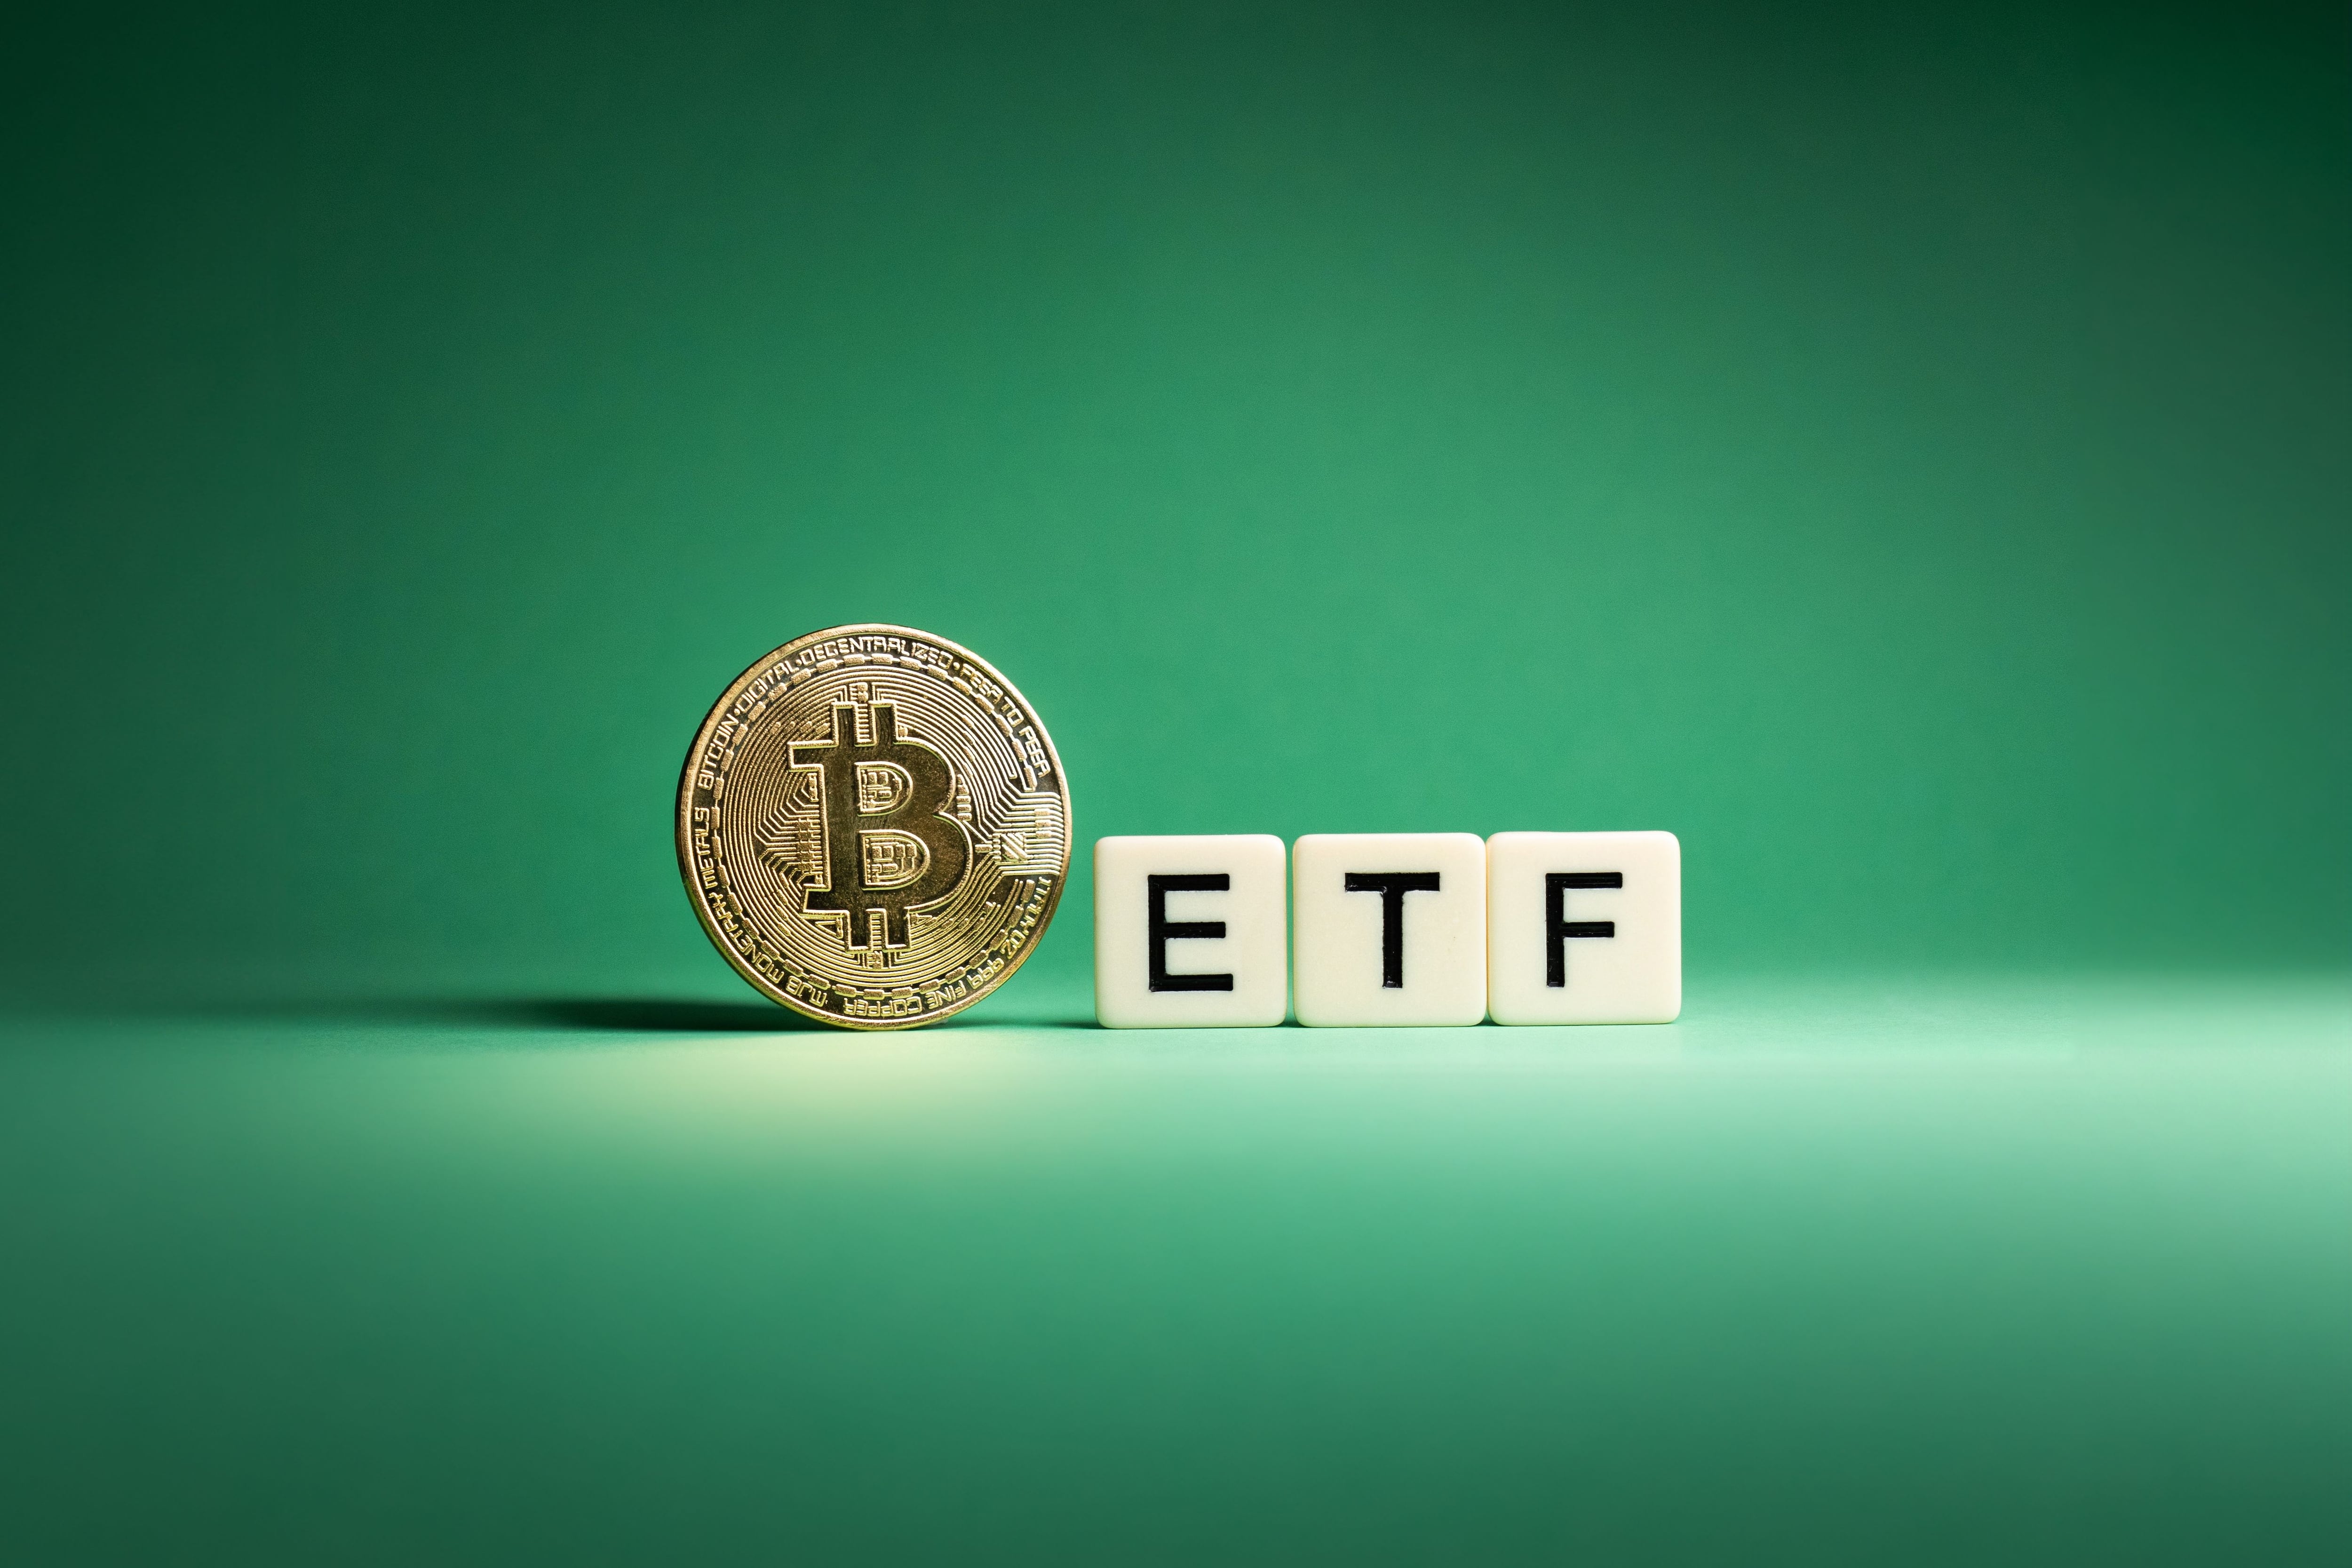 Bitcoin ETFs log best day since March as investors eye Fed rate cuts